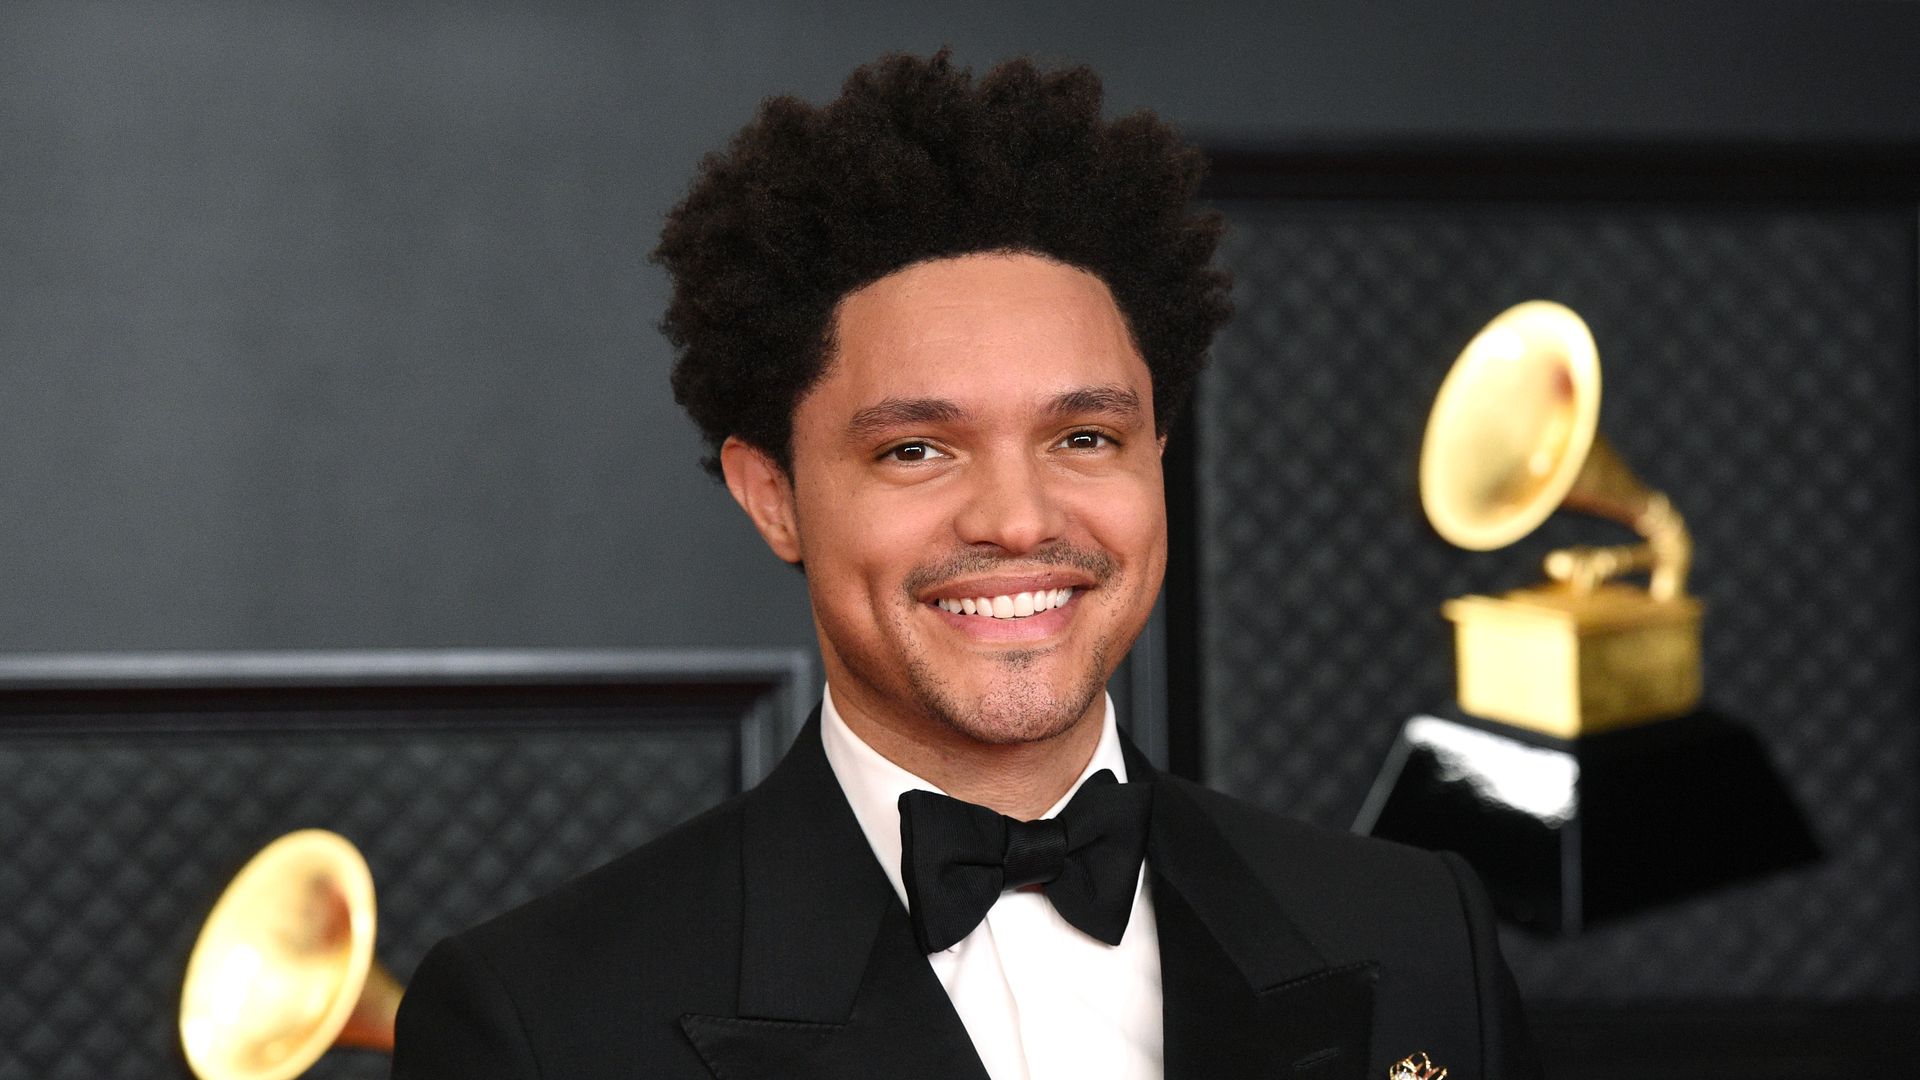 Trevor Noah attends the 63rd Annual GRAMMY Awards at Los Angeles Convention Center on March 14, 2021 in Los Angeles, California